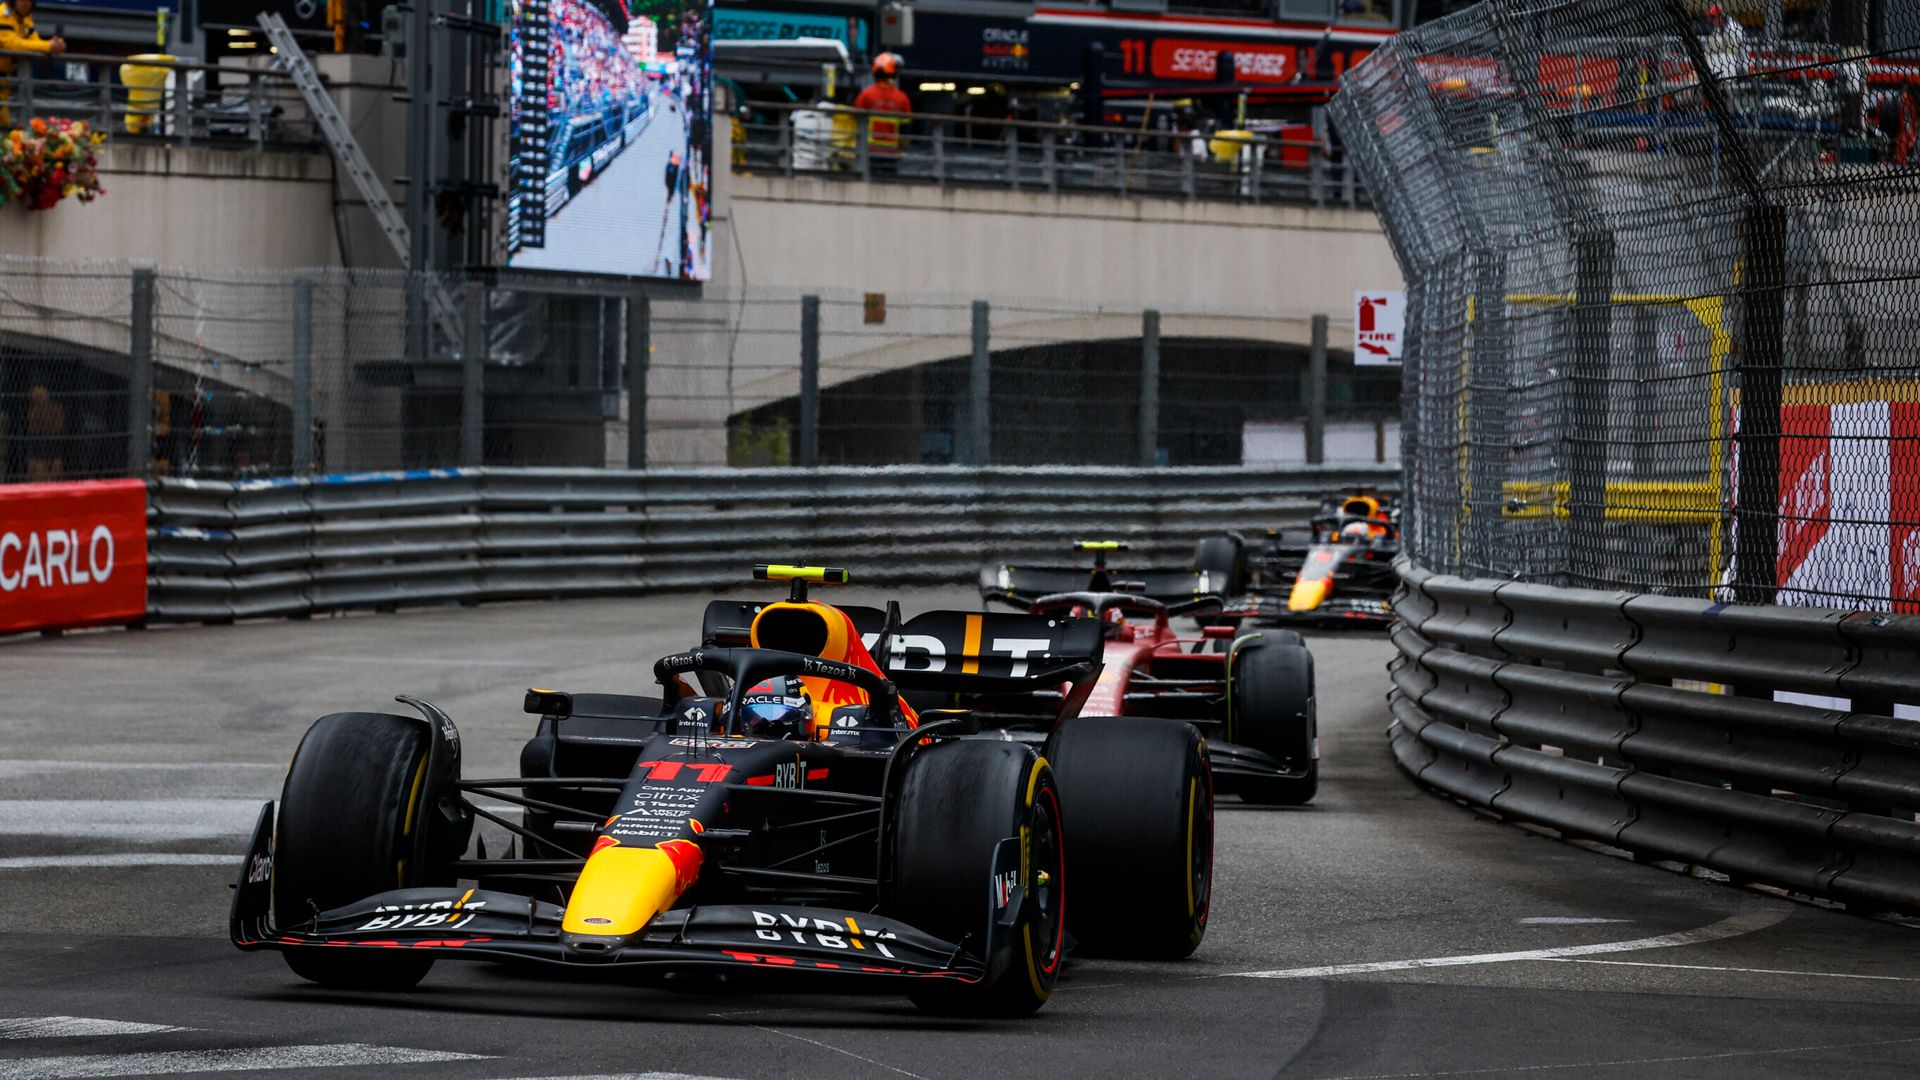 Why Monaco may see Red Bull beaten on merit | McLaren to cause shock?